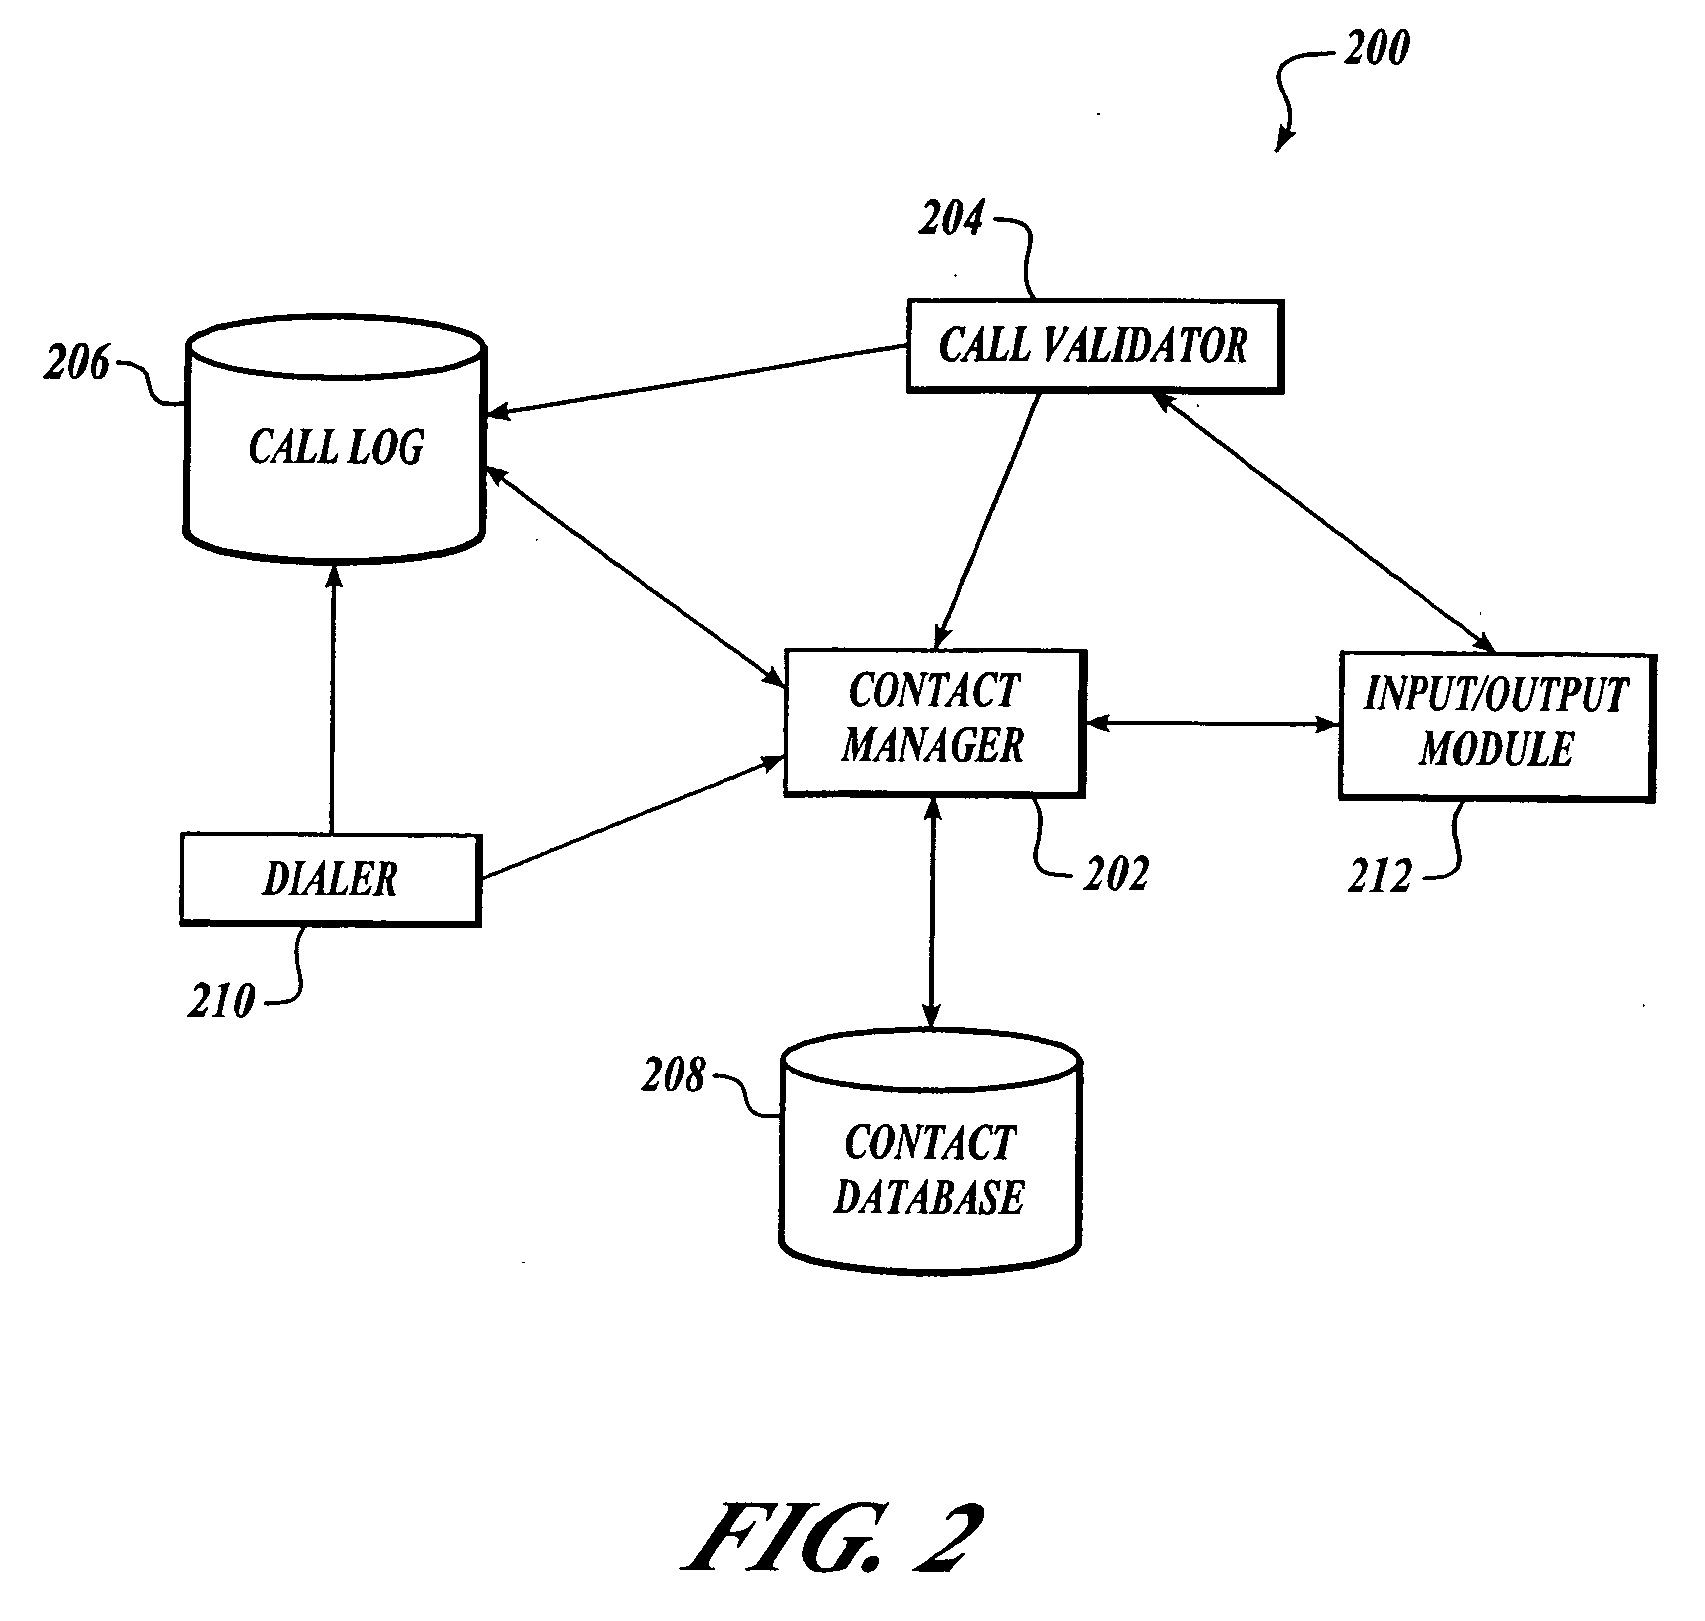 Method and system for managing changes to a contact database